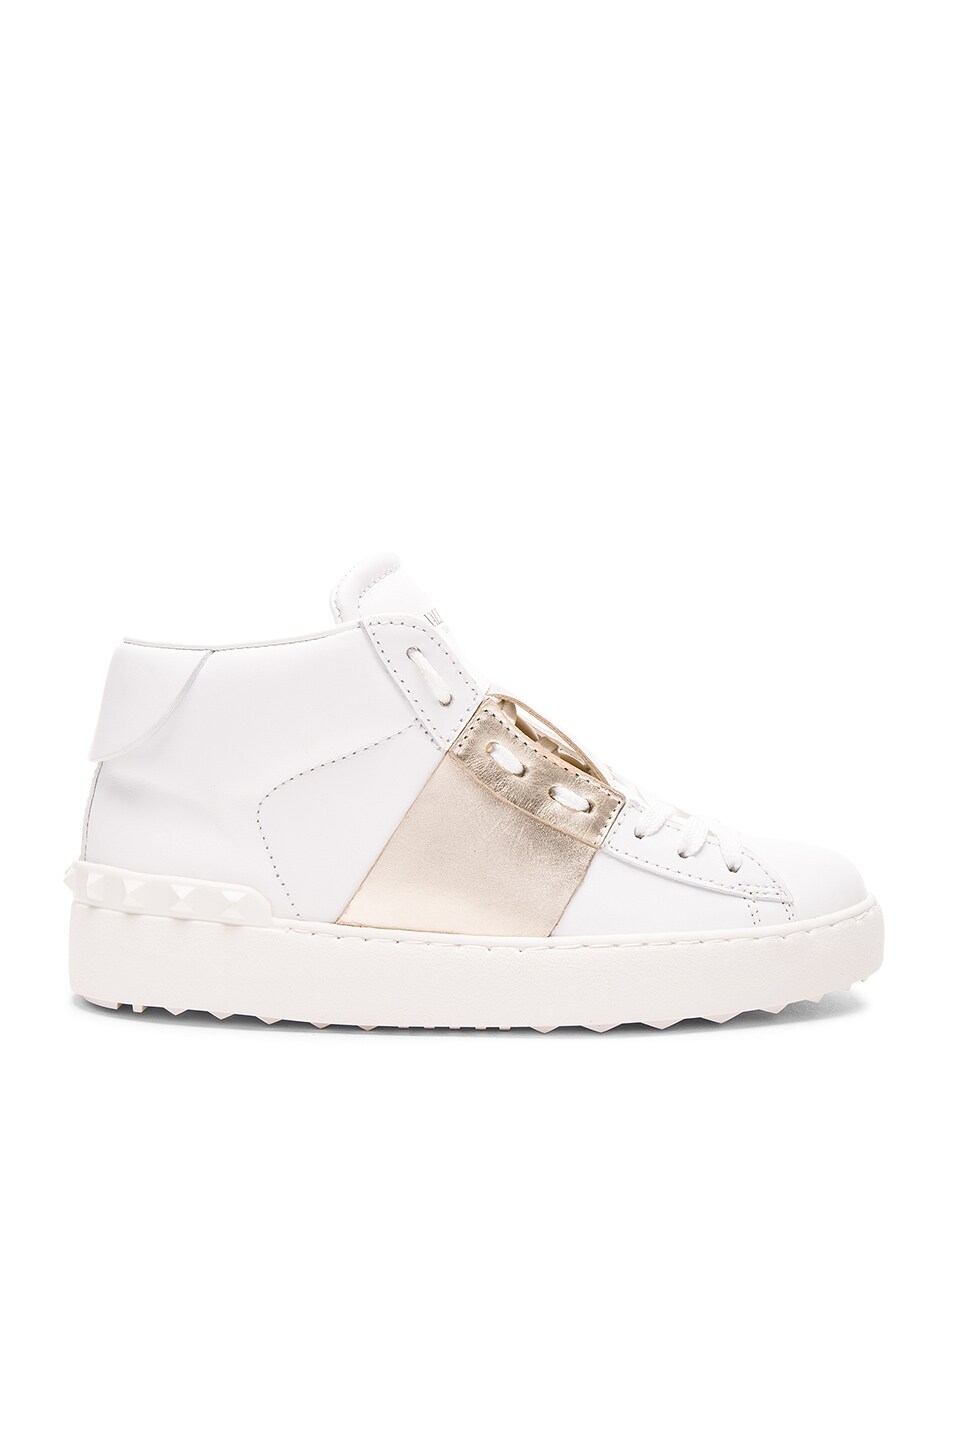 Image 1 of Valentino Garavani High Top Leather Sneakers in Gold